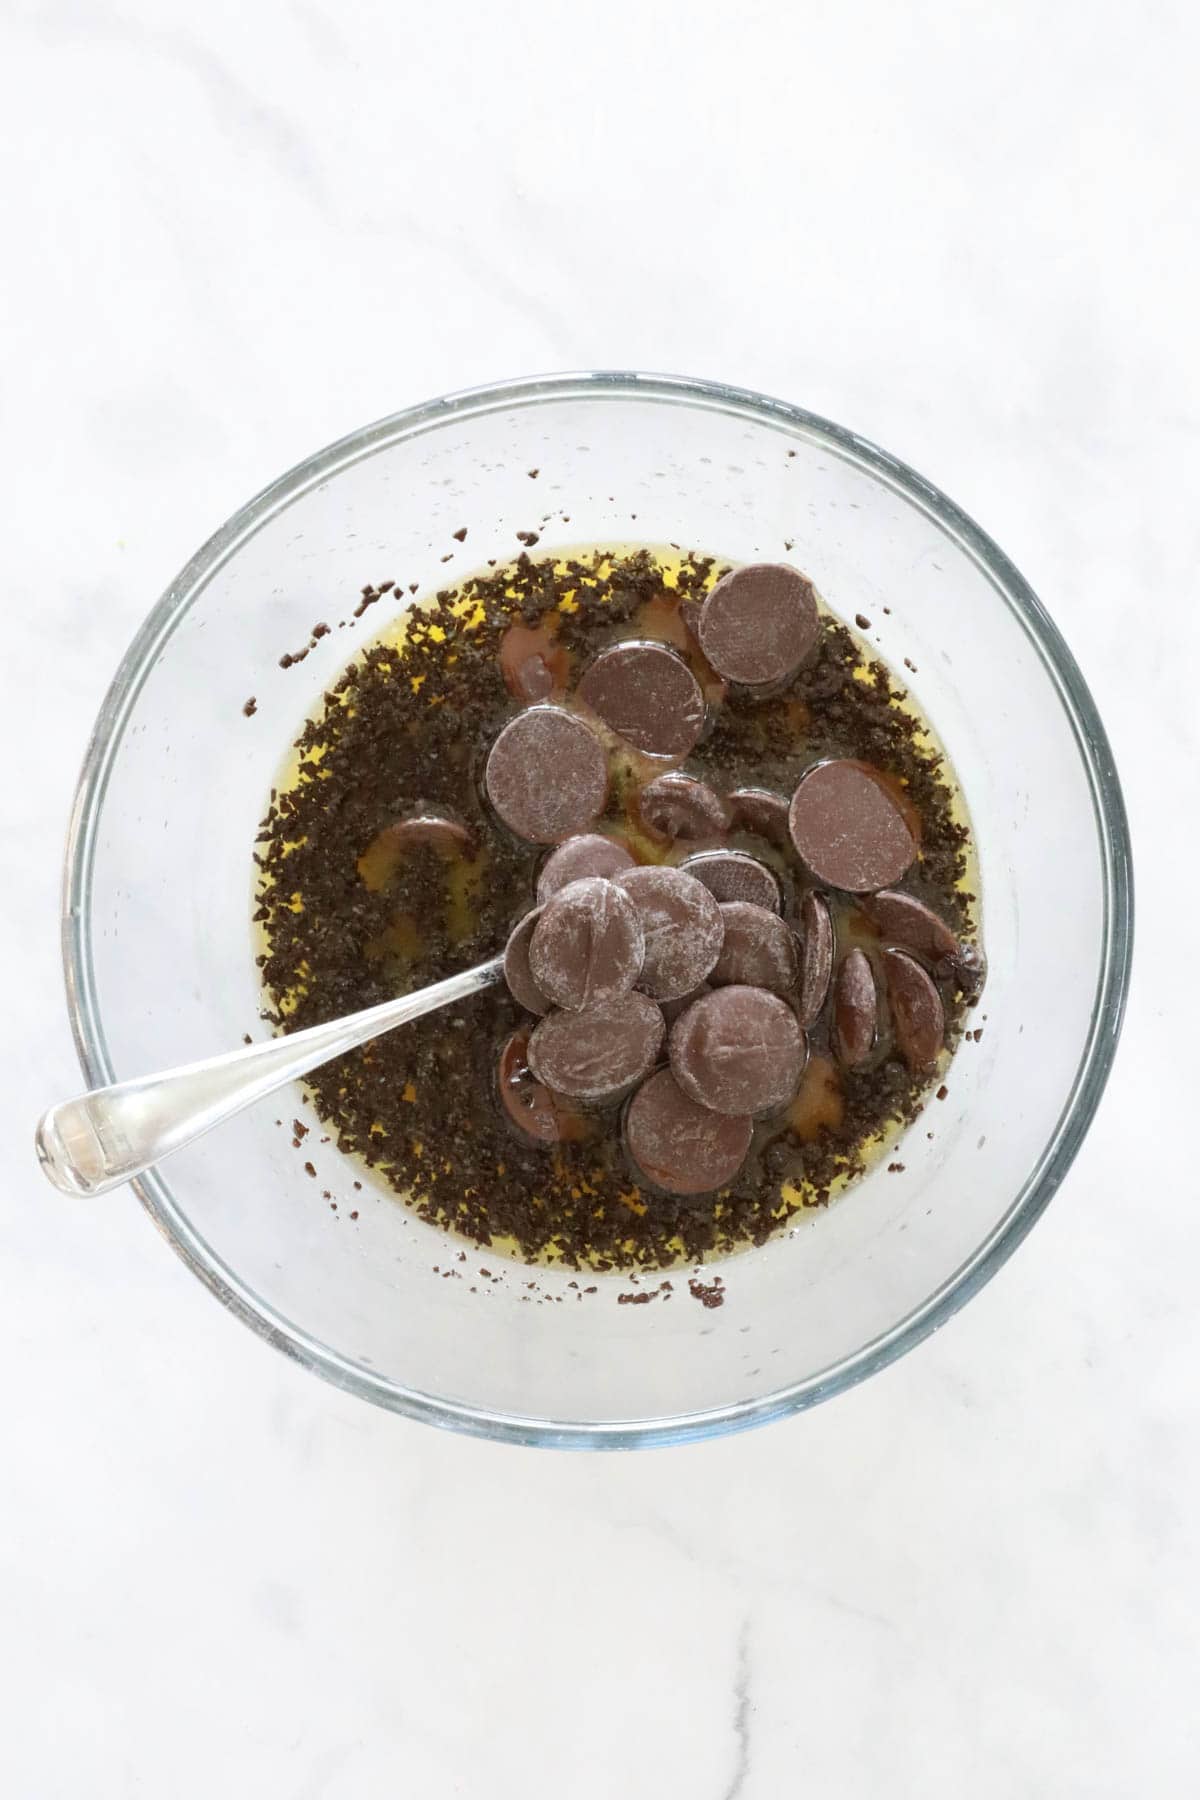 Chocolate melts added to the melted butter and espresso granules.